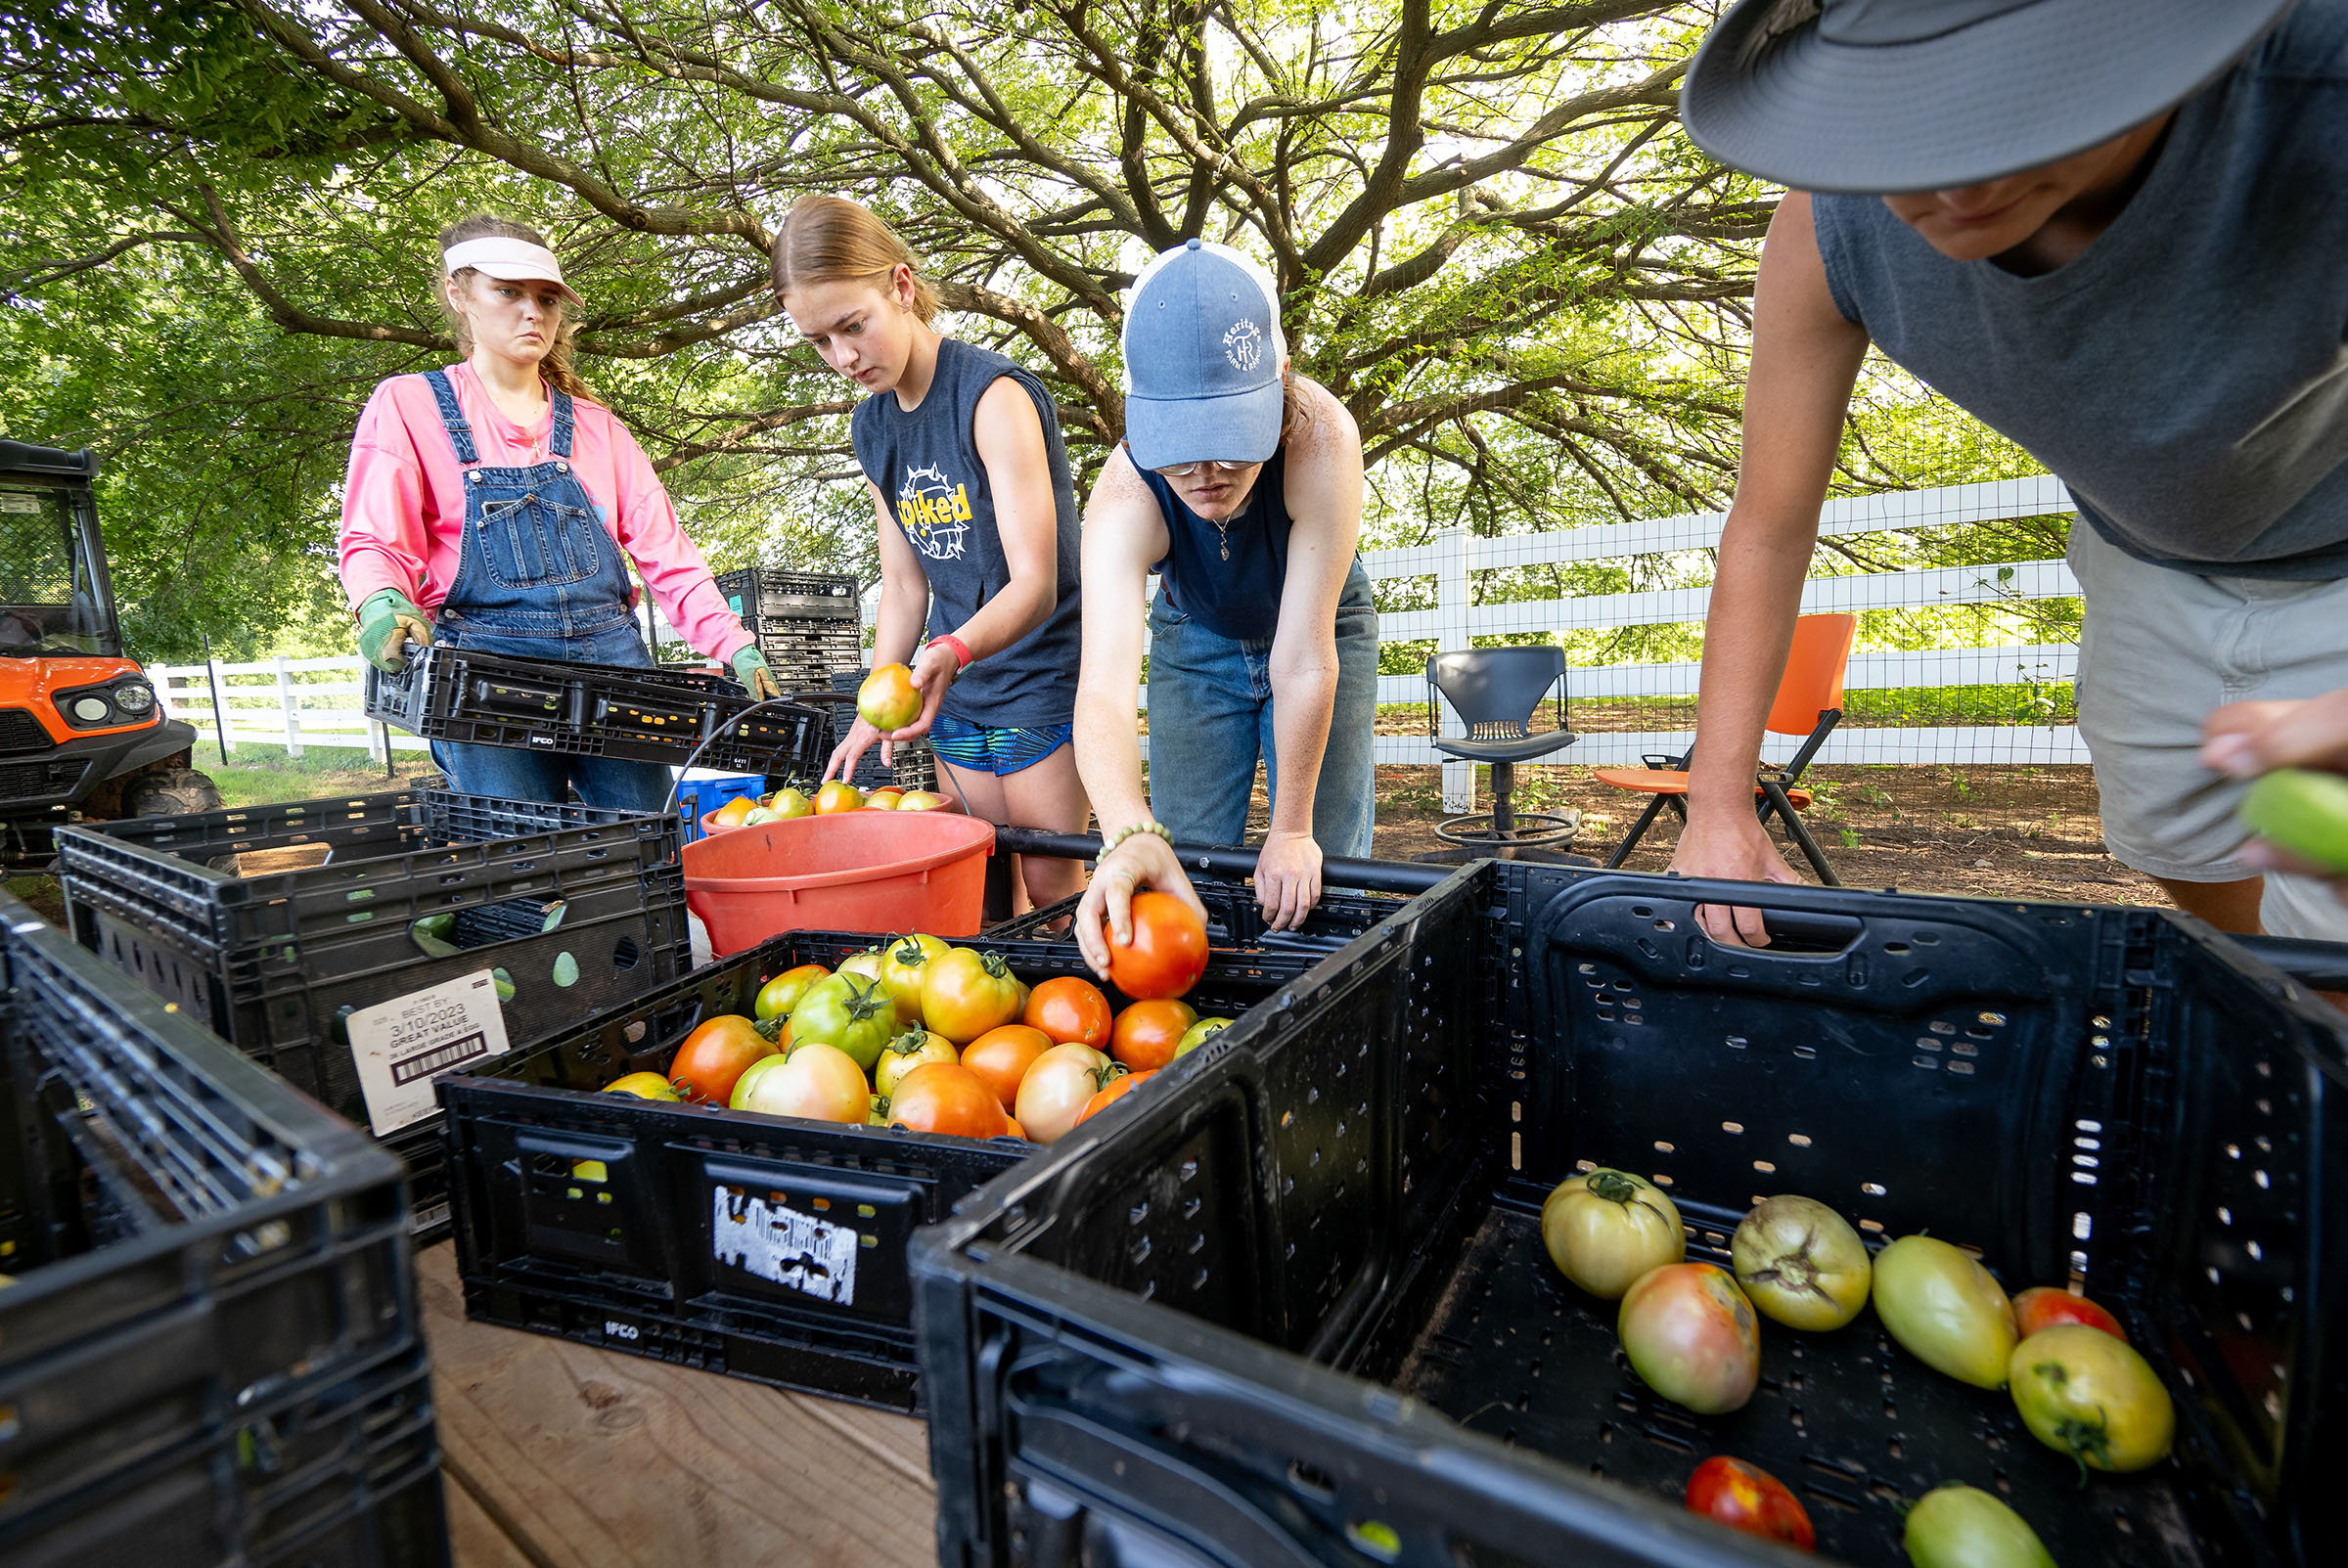 The new OSU Student Farm is helping address food insecurity in Payne County while also providing educational opportunities to students. (Photo by Mitchell Alcala, OSU Agriculture.)